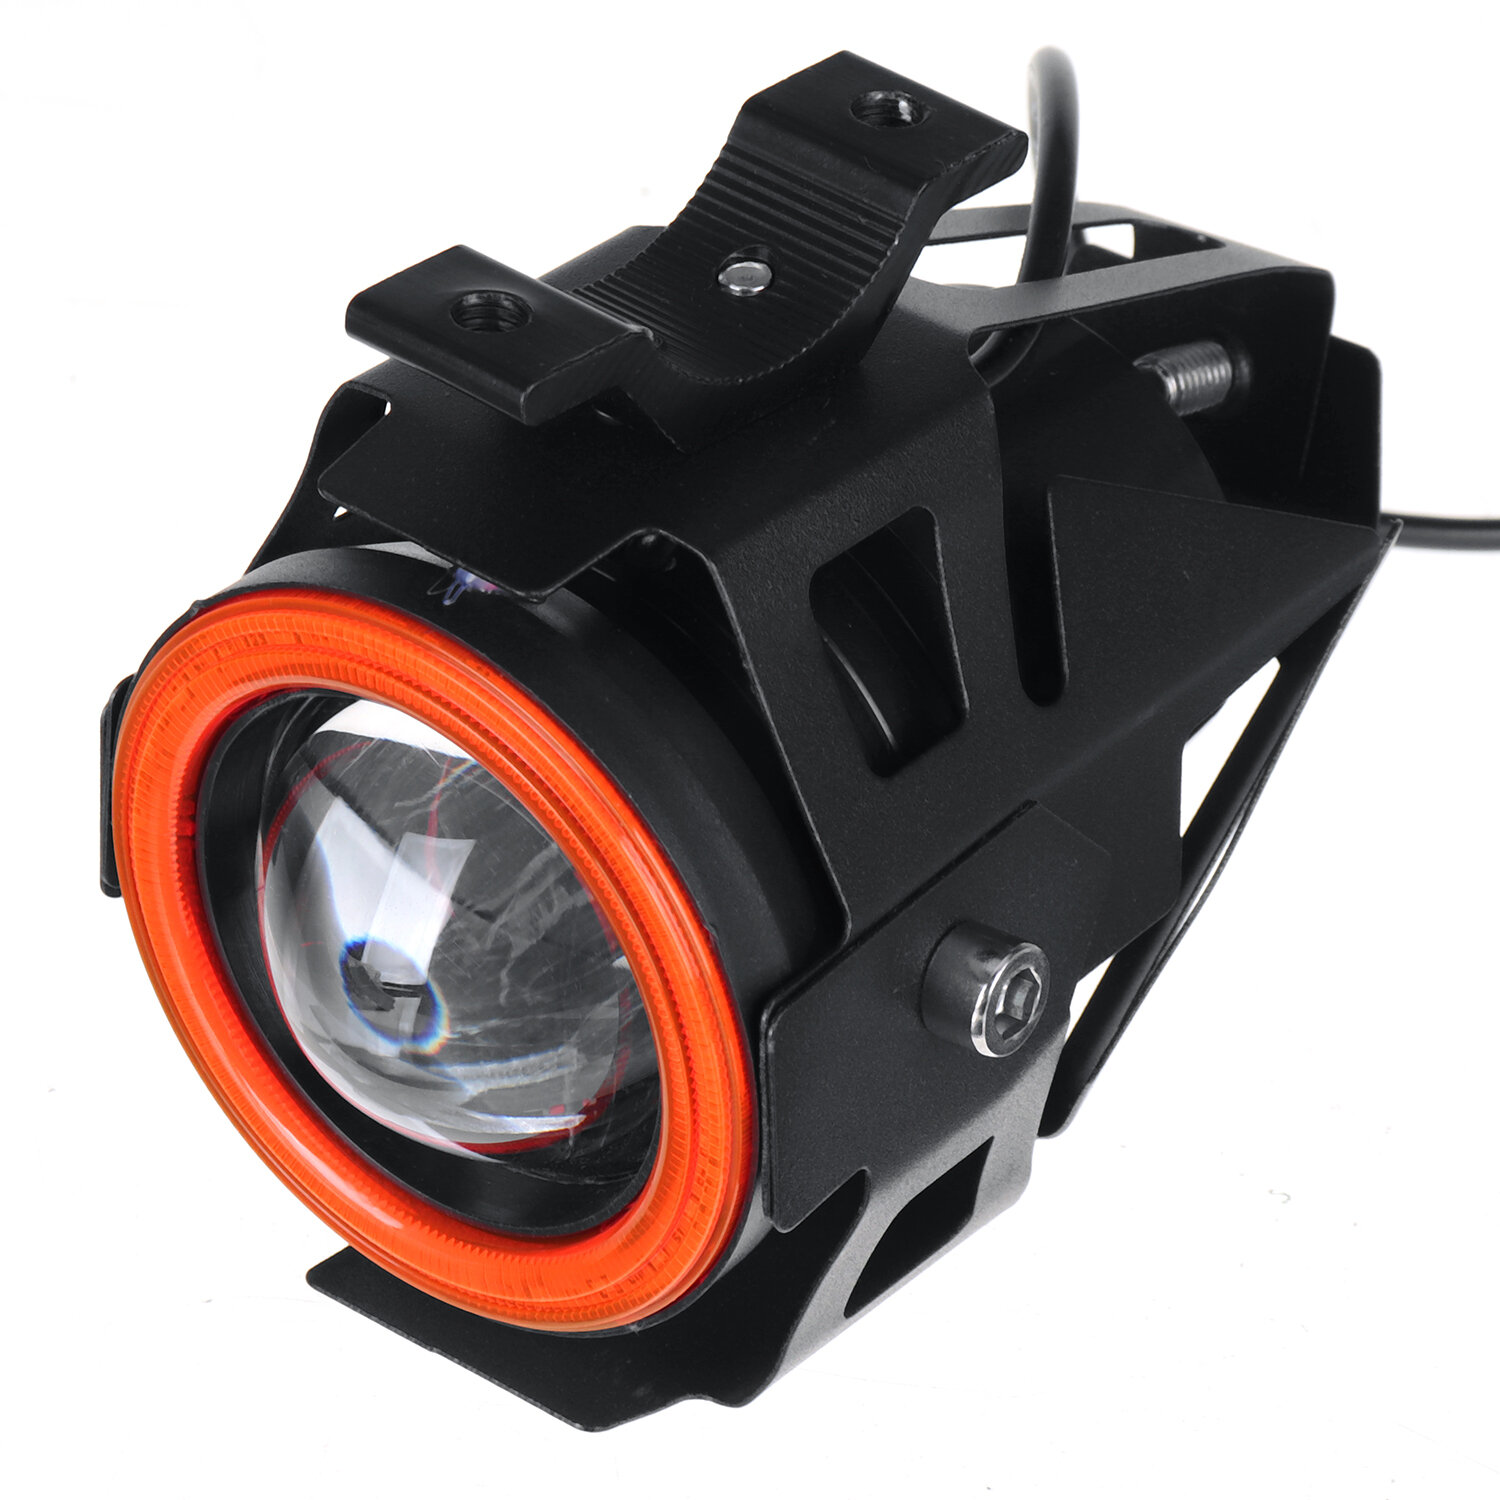 LAOTIE U7 Front Light Scooter Light Headlamp Night Riding Suitable For 12-70V Electric Bike Scooter For Laotie Scooter COD